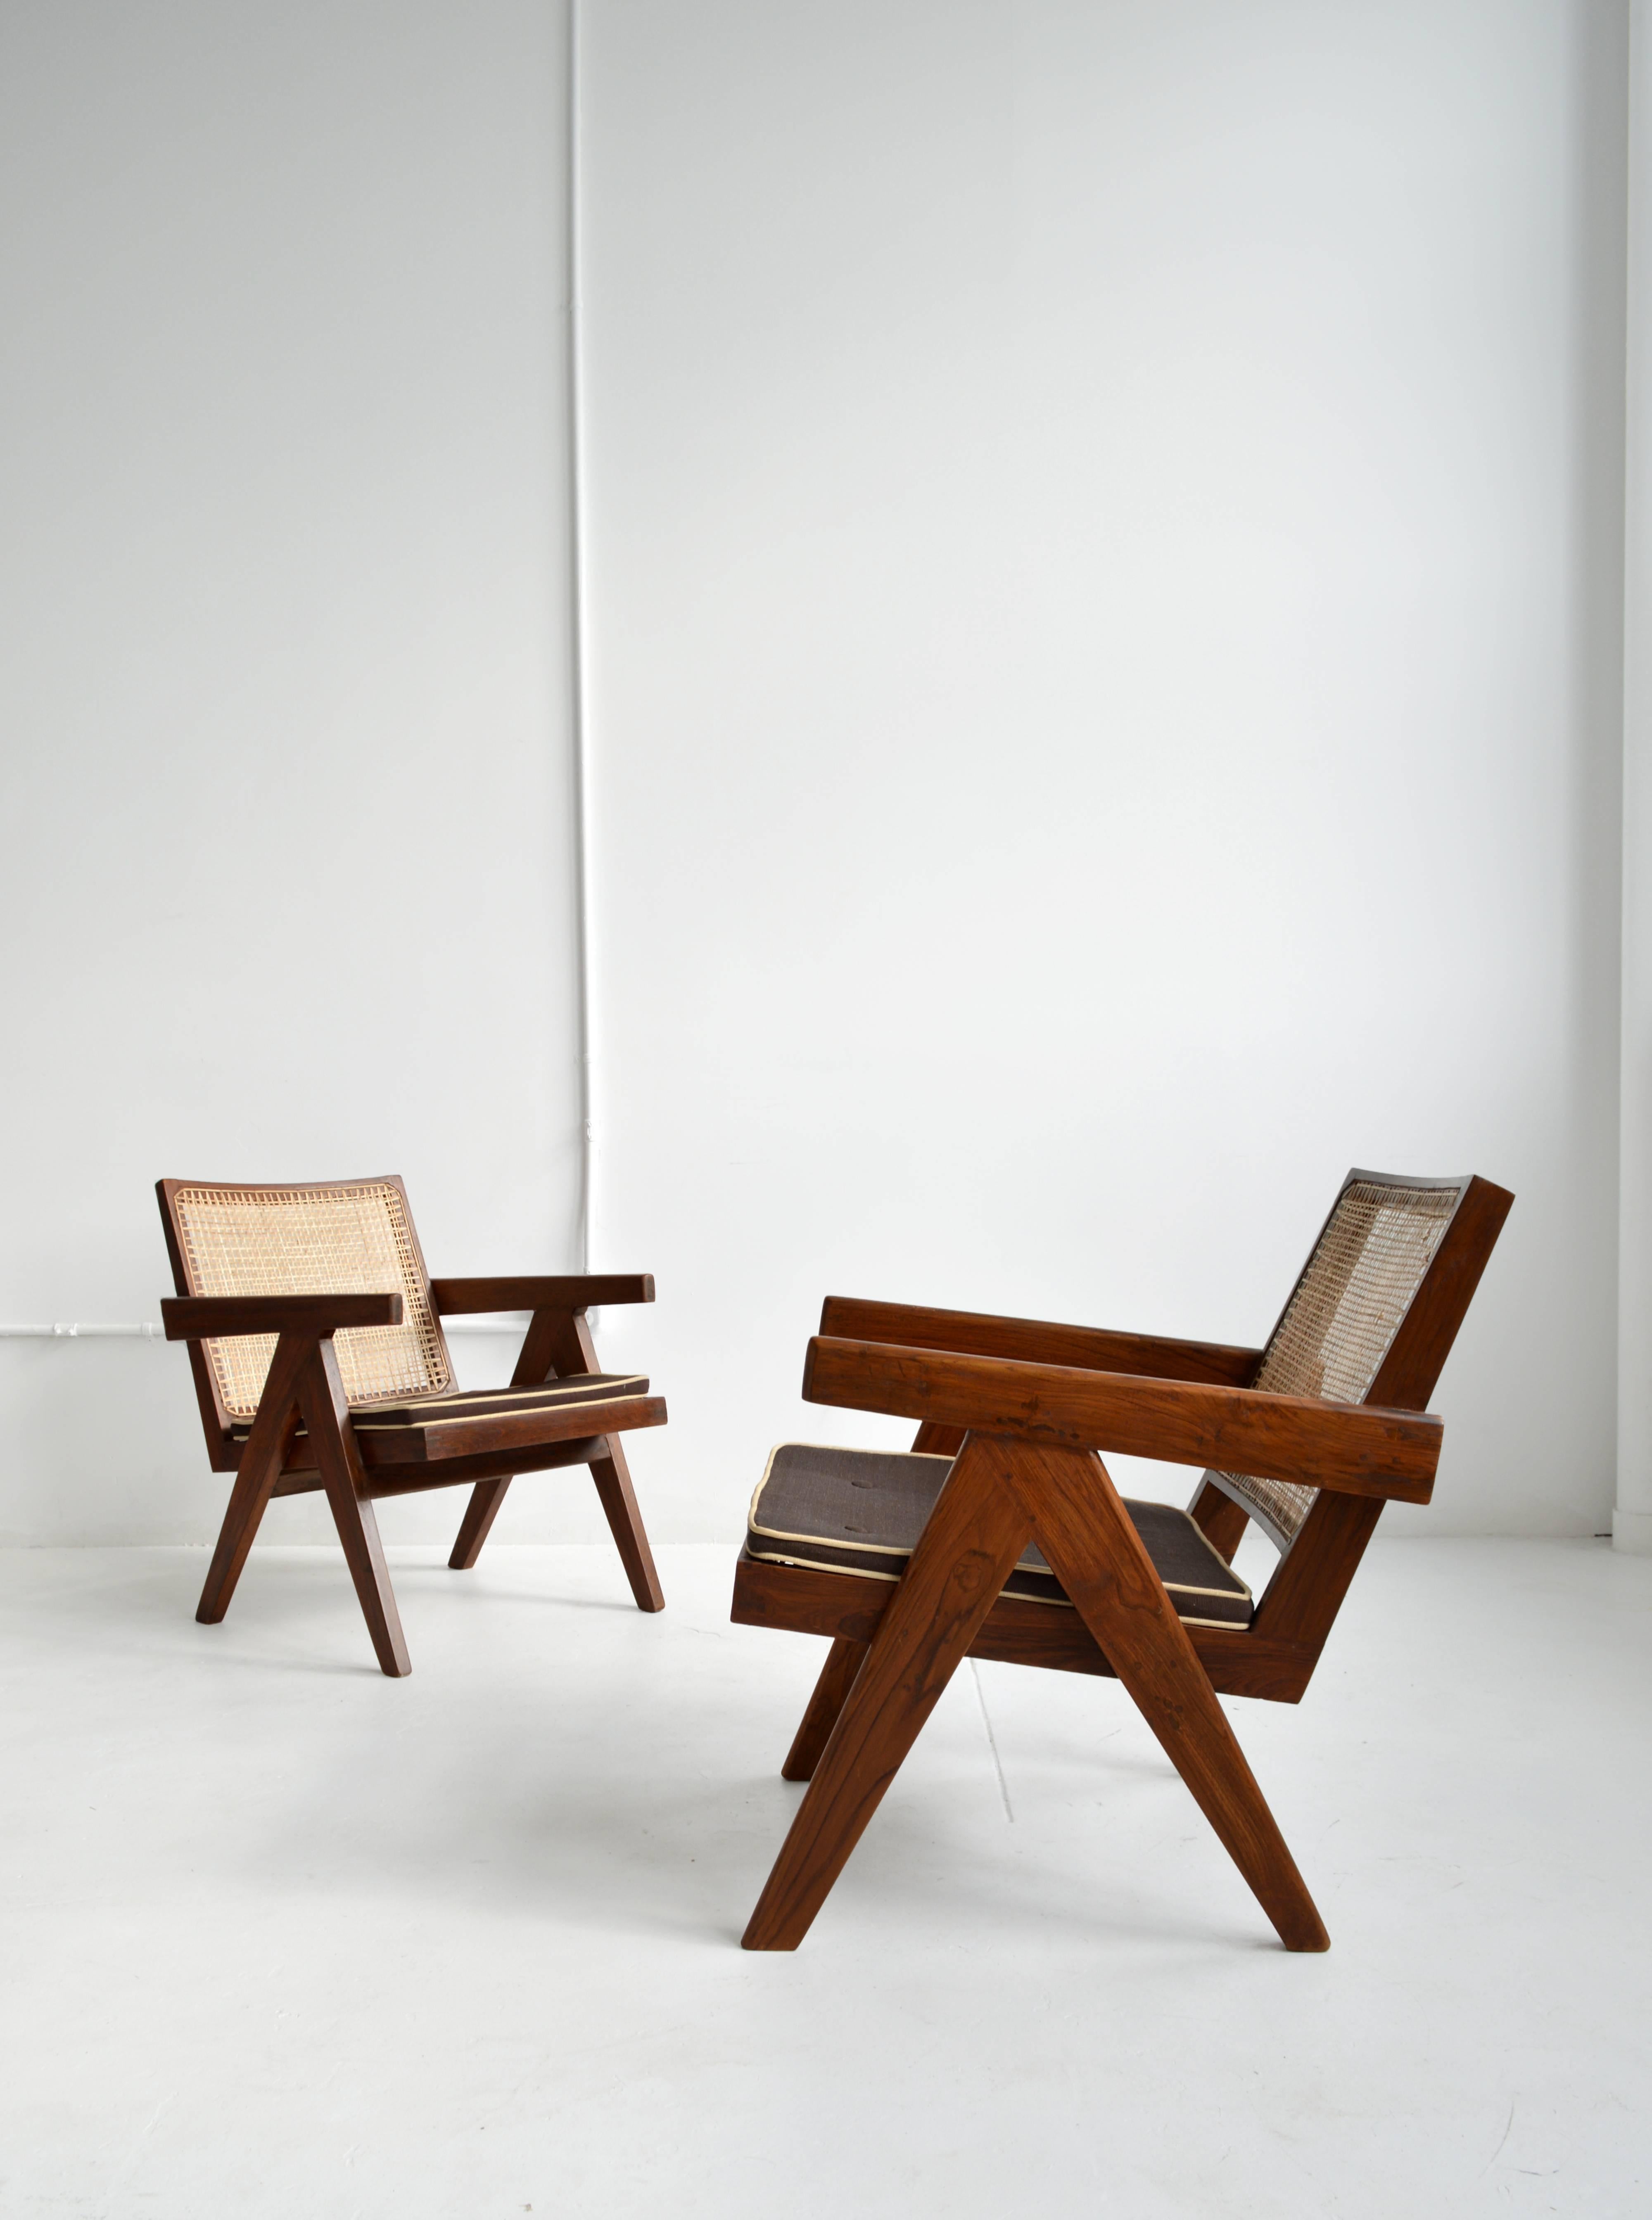 Pair of iconic Pierre Jeanneret teak armchairs with cane back and seat from the Chandigarh administrative buildings in India, 1950s. Jeanneret's simplistic design highlights the inherent beauty and integrity of his materials and convey a refined,